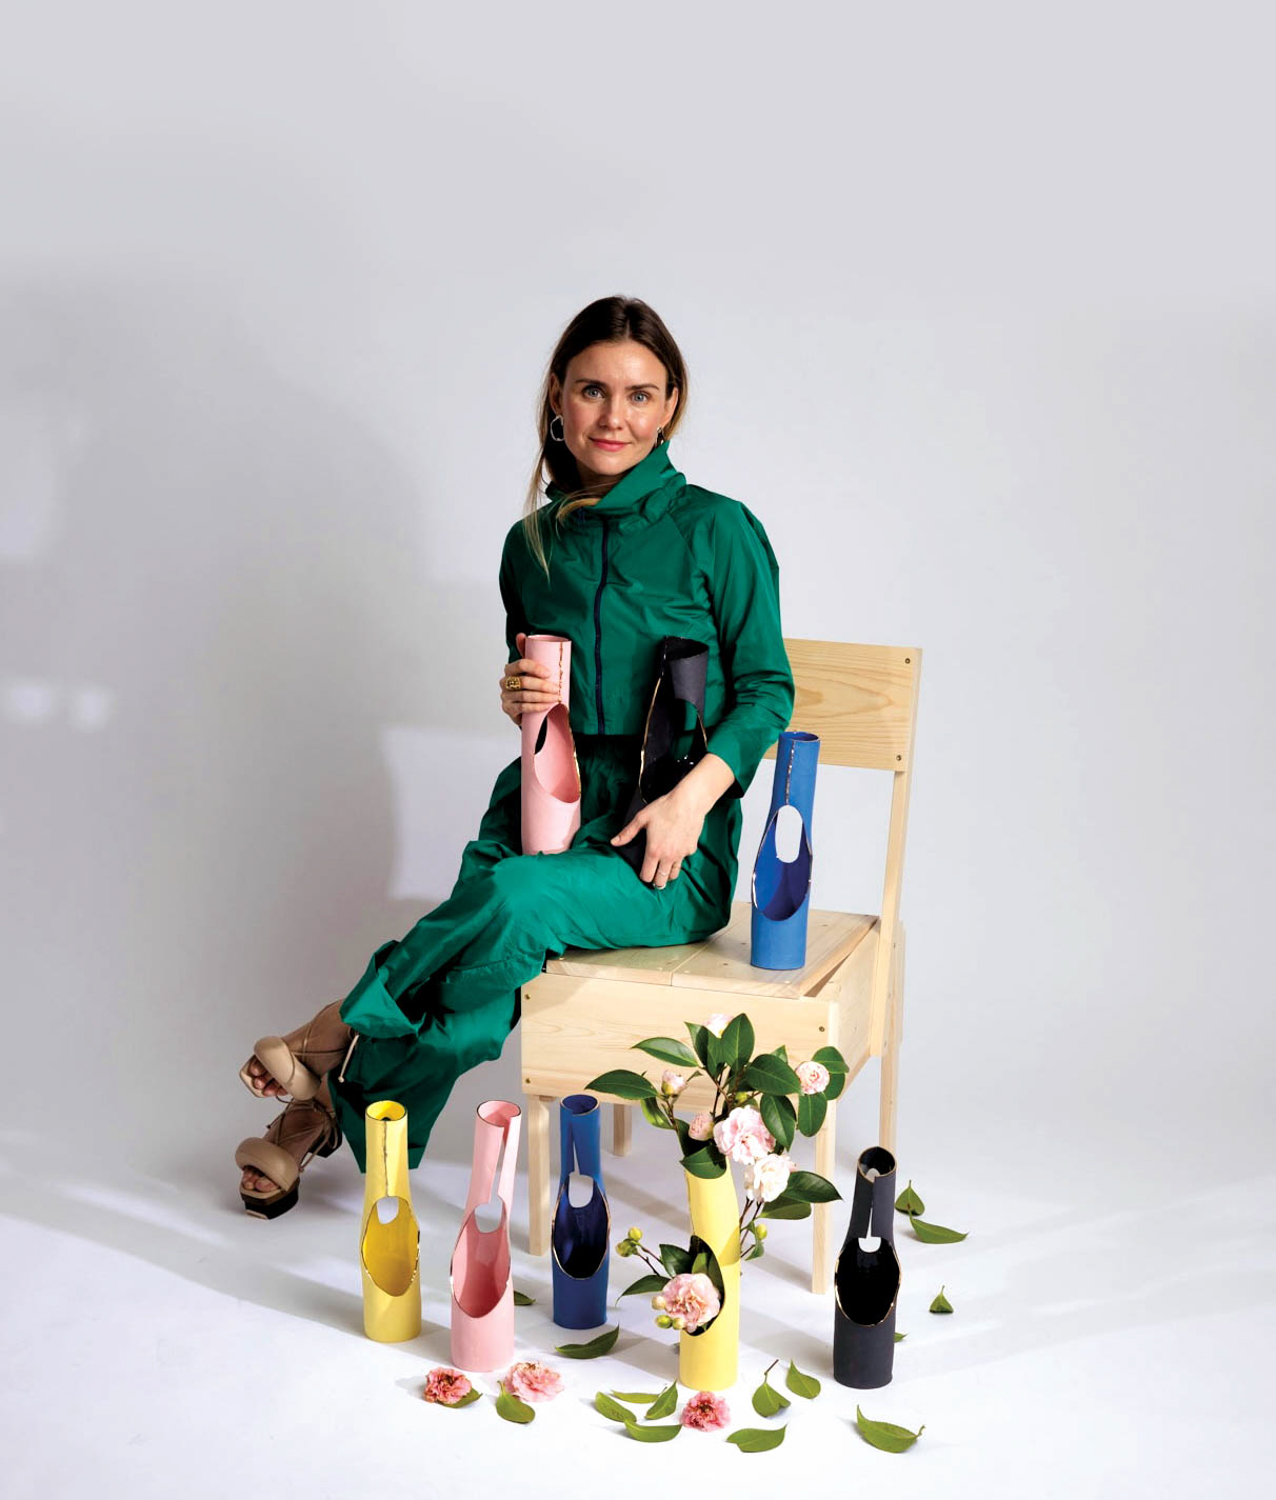 Ceramicist Evgeniya Plotnikova sitting on a wood chair with her pink, yellow, black and blue vases